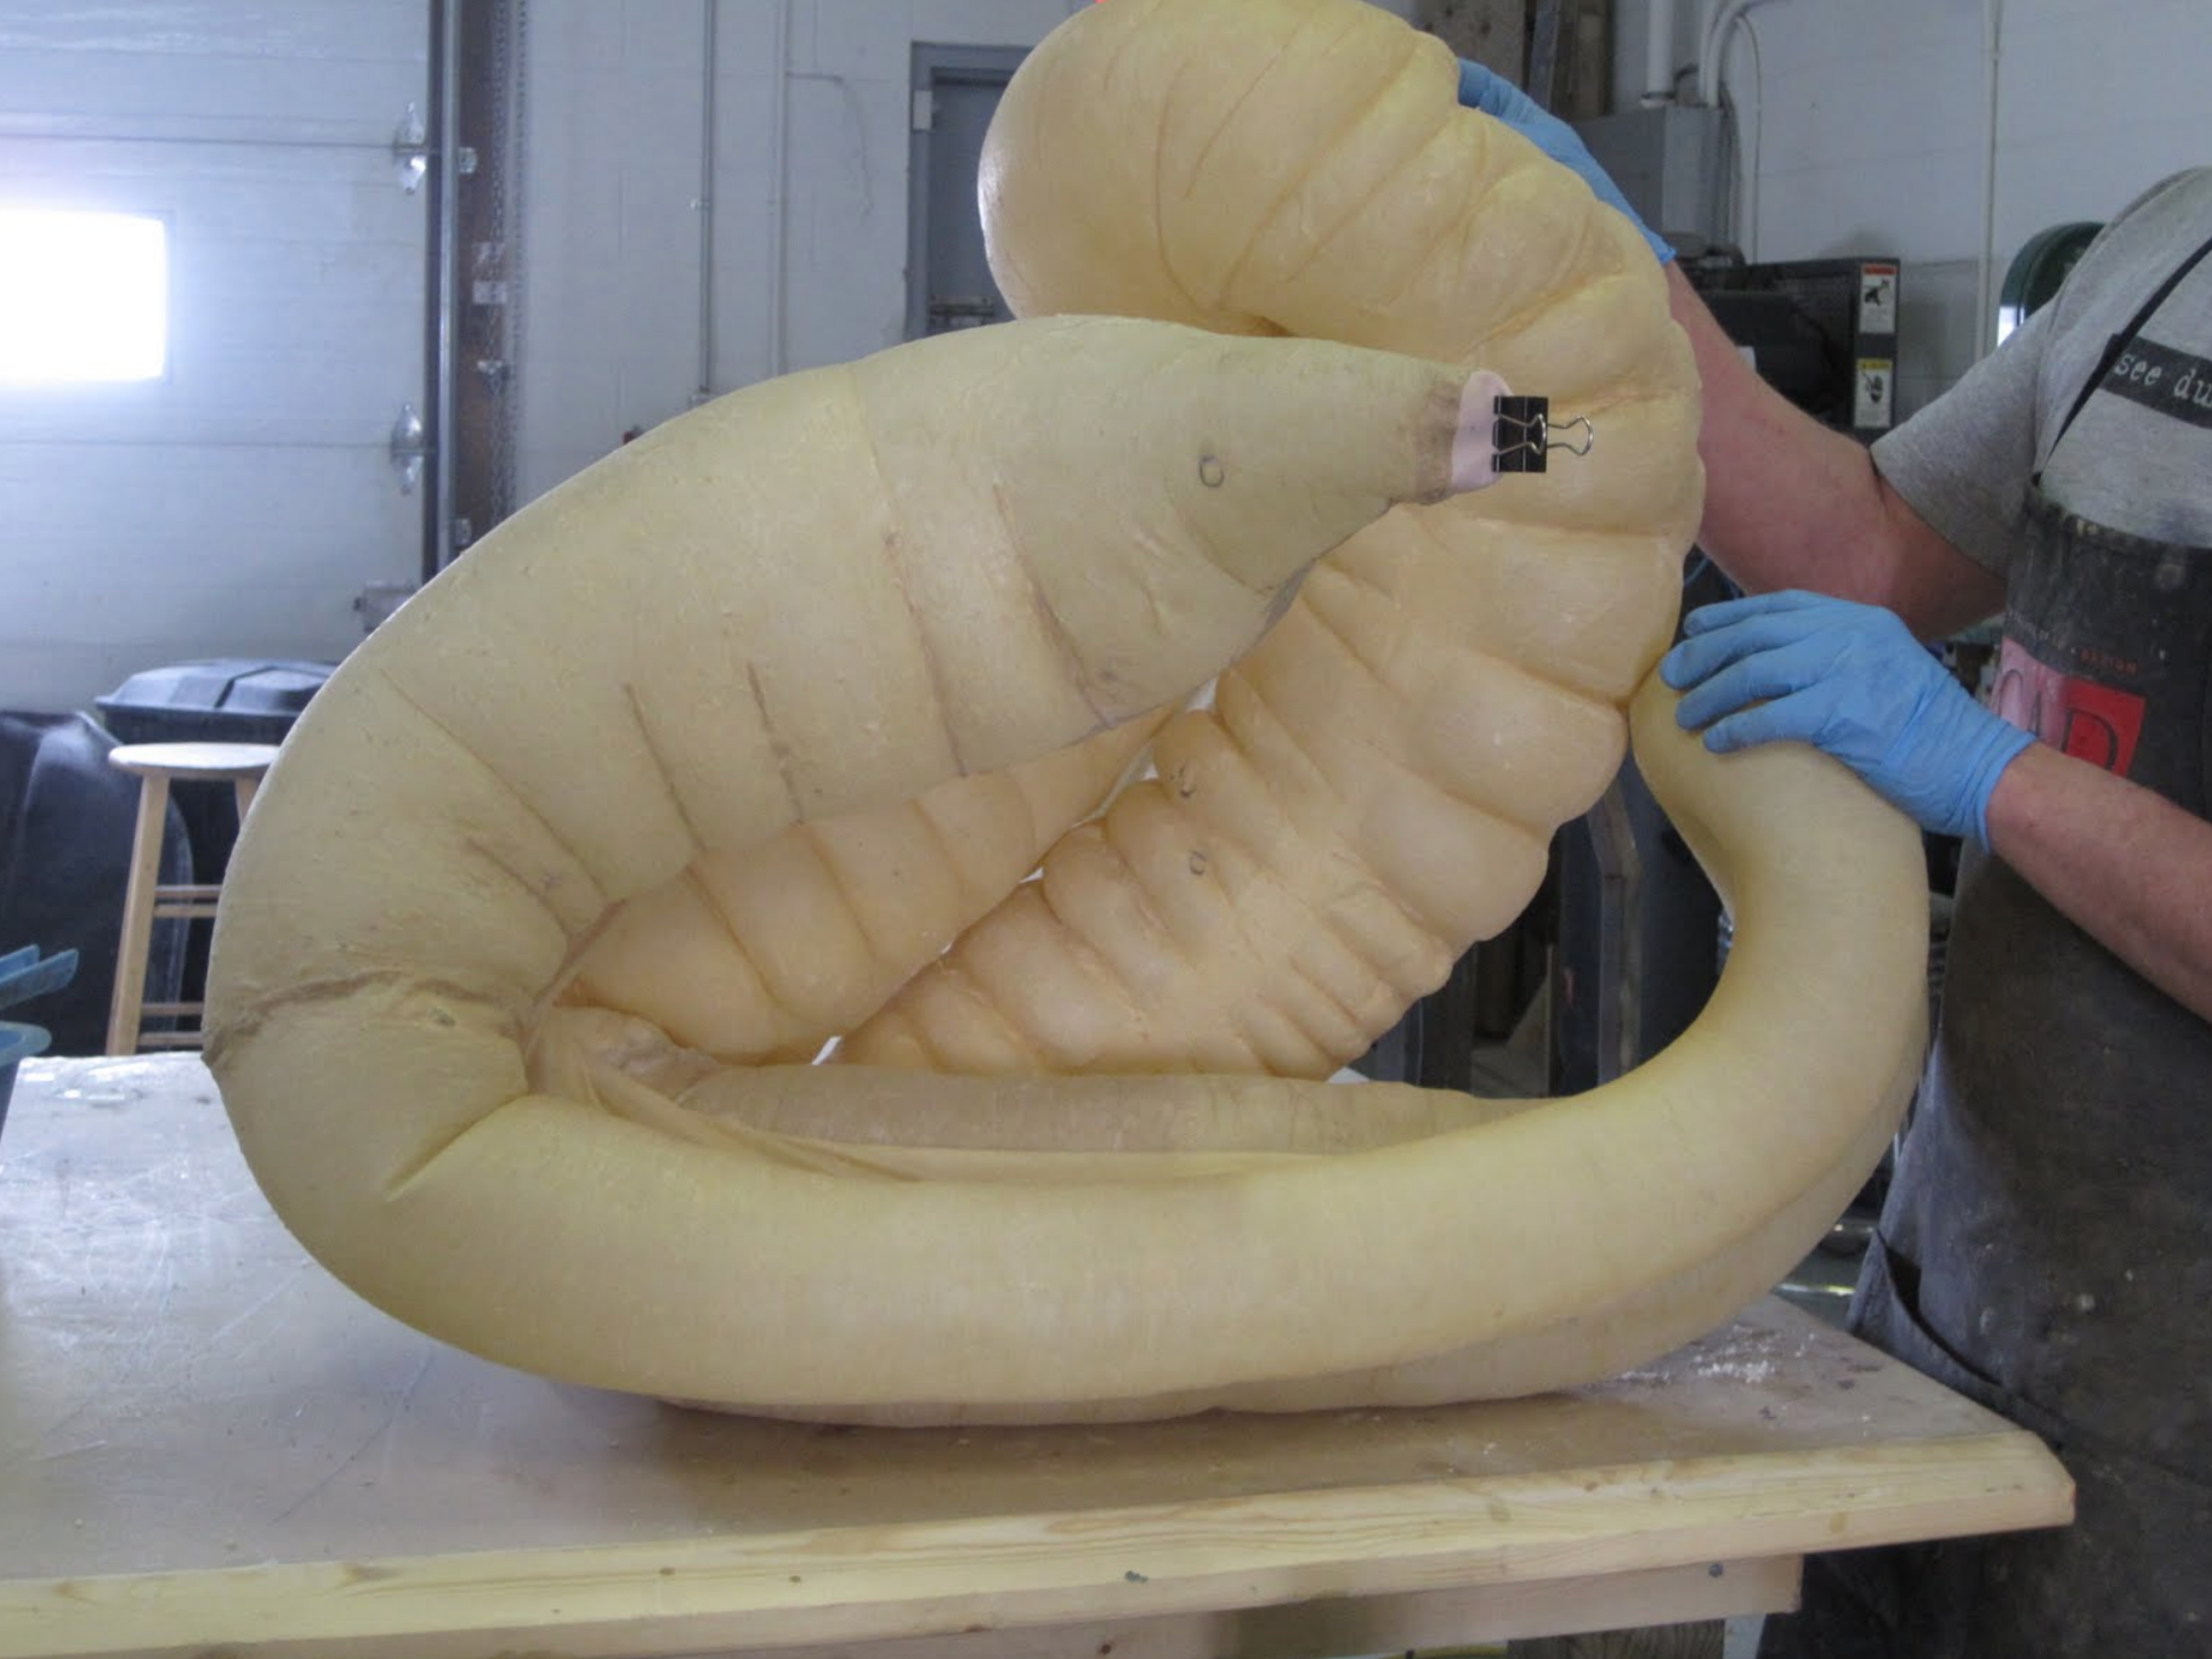  The nearly complete equine colon model. A portion of the small intestine and small colon will be added as well. The finished units will have chambers that can be inflated separately to simulate various equine colic issues. These units will mount int